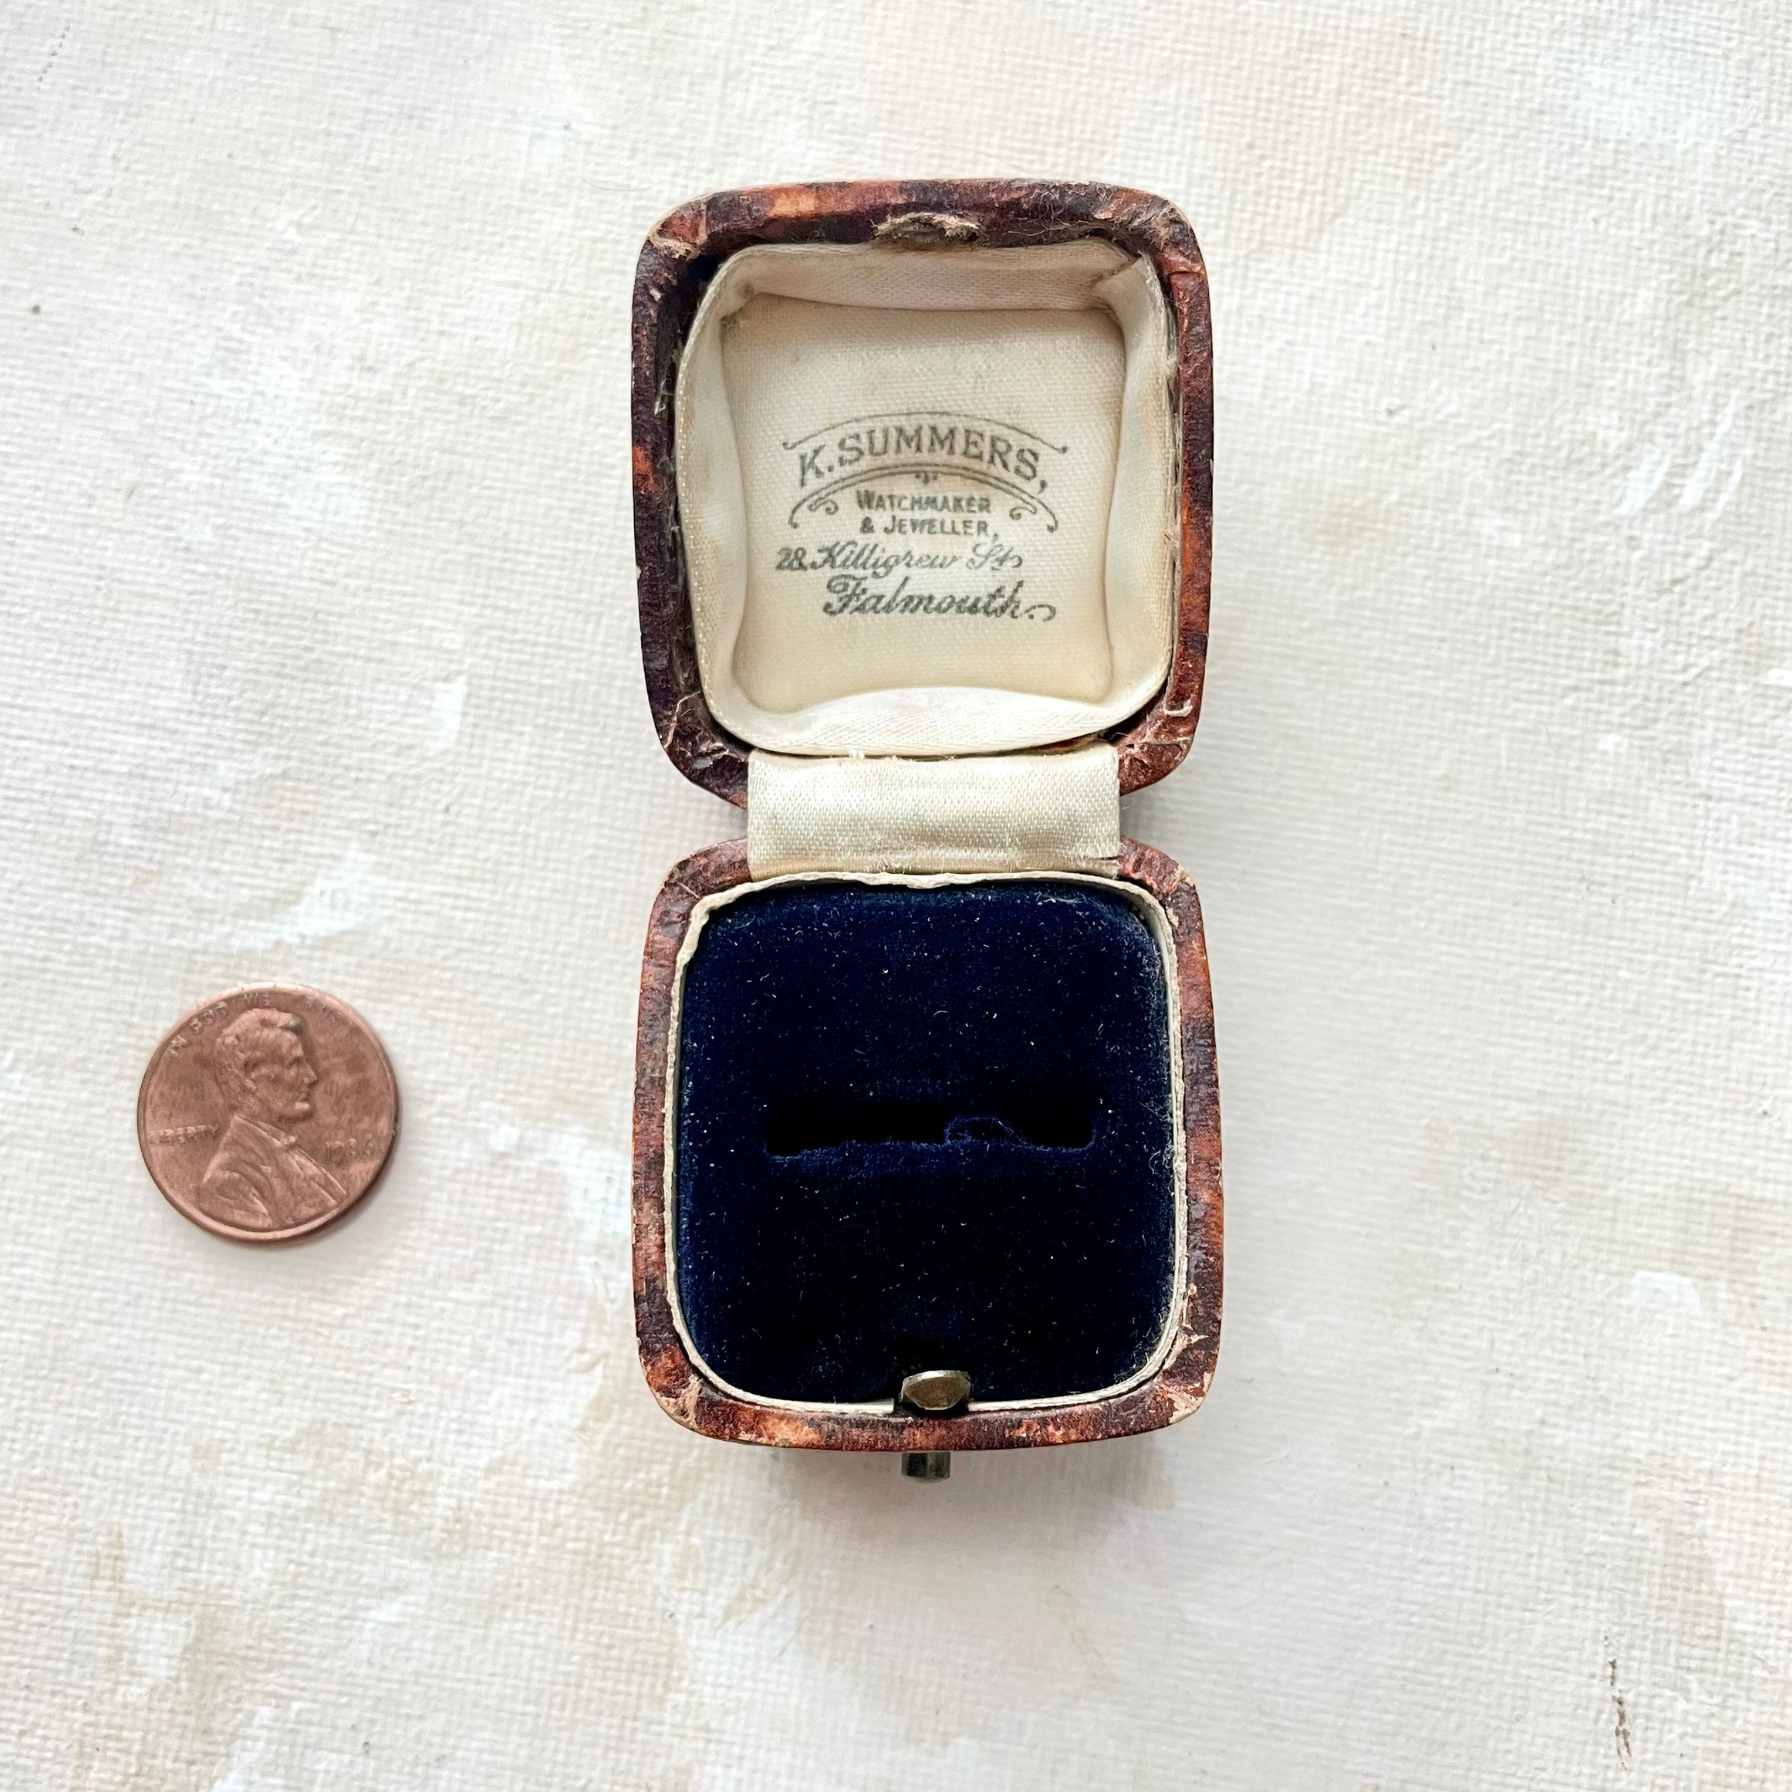 Vintage Ring Box - Classic K. Summers